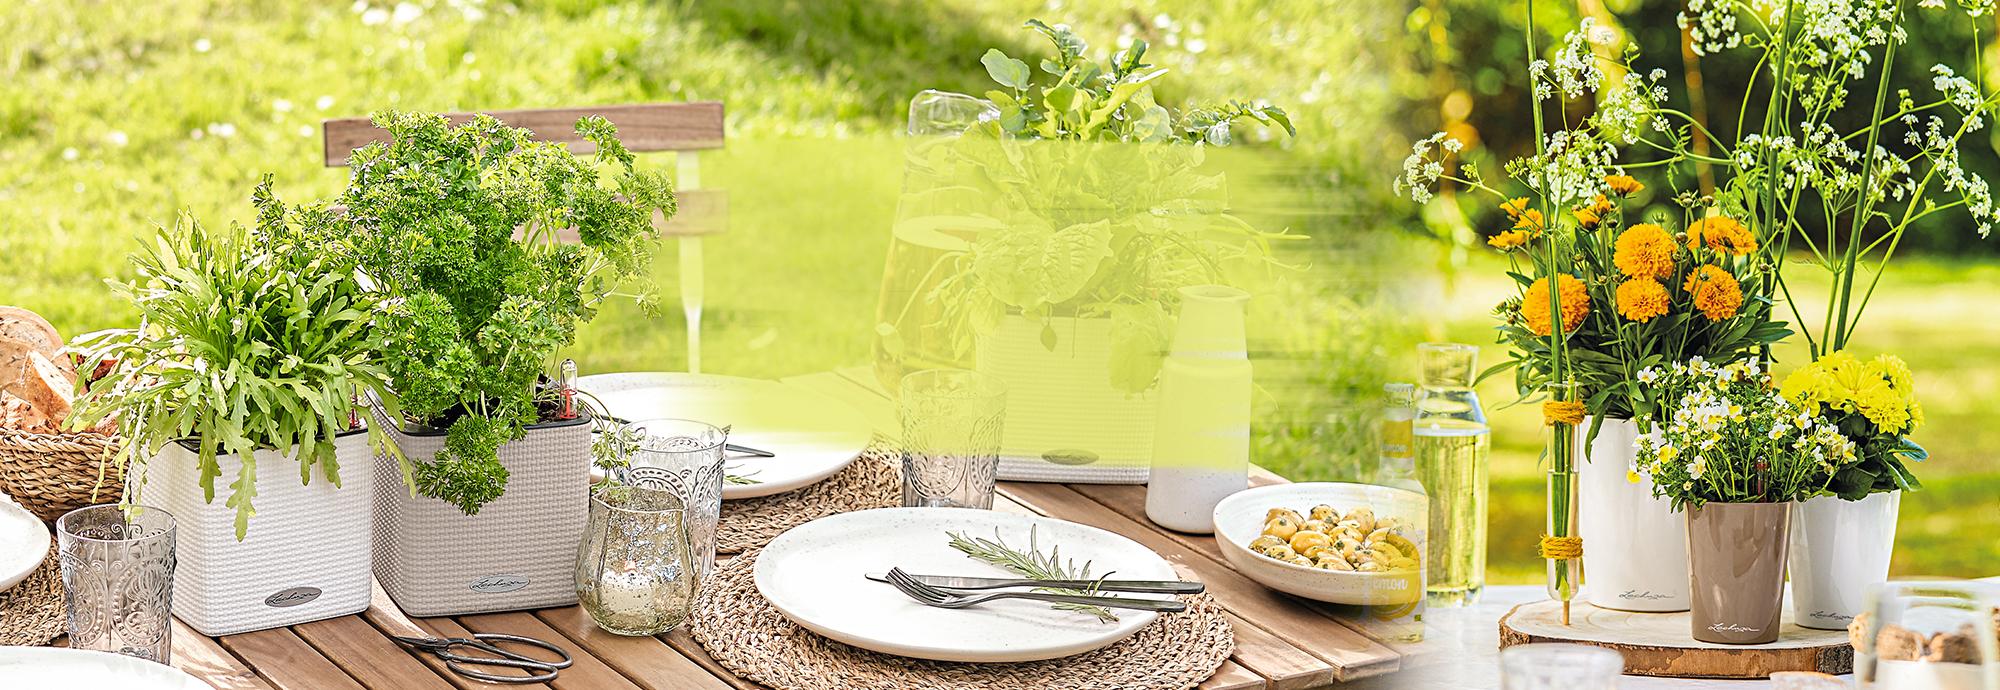 Spring Table Decoration: Enjoy the Outdoors!